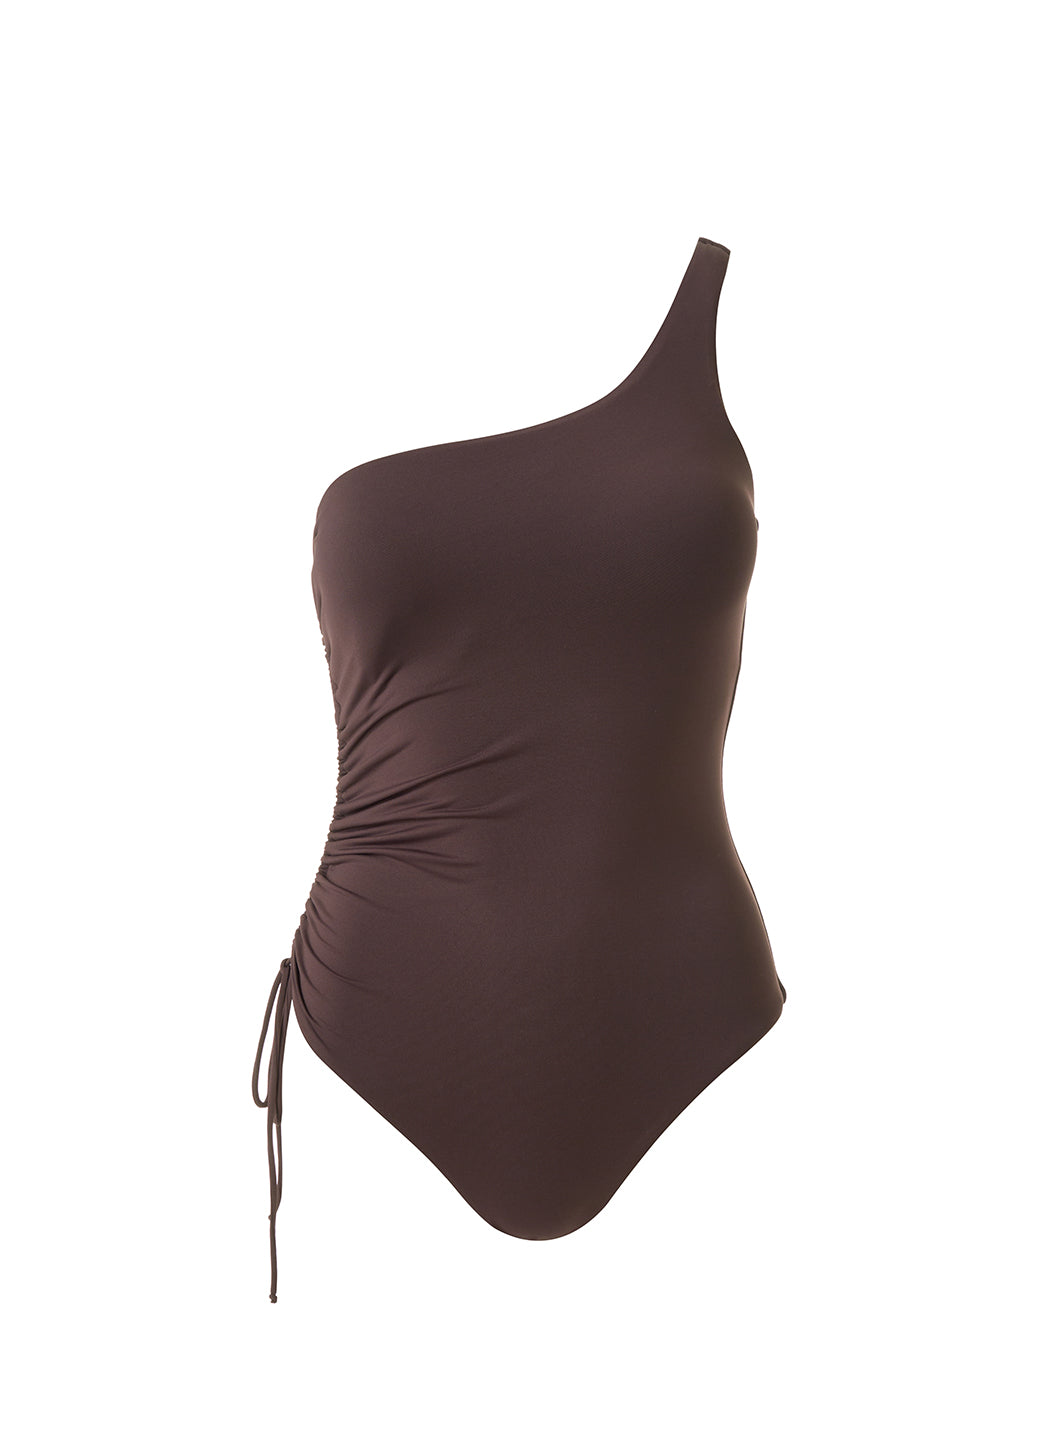 Bodrum_Brown_Swimsuit_Cutout